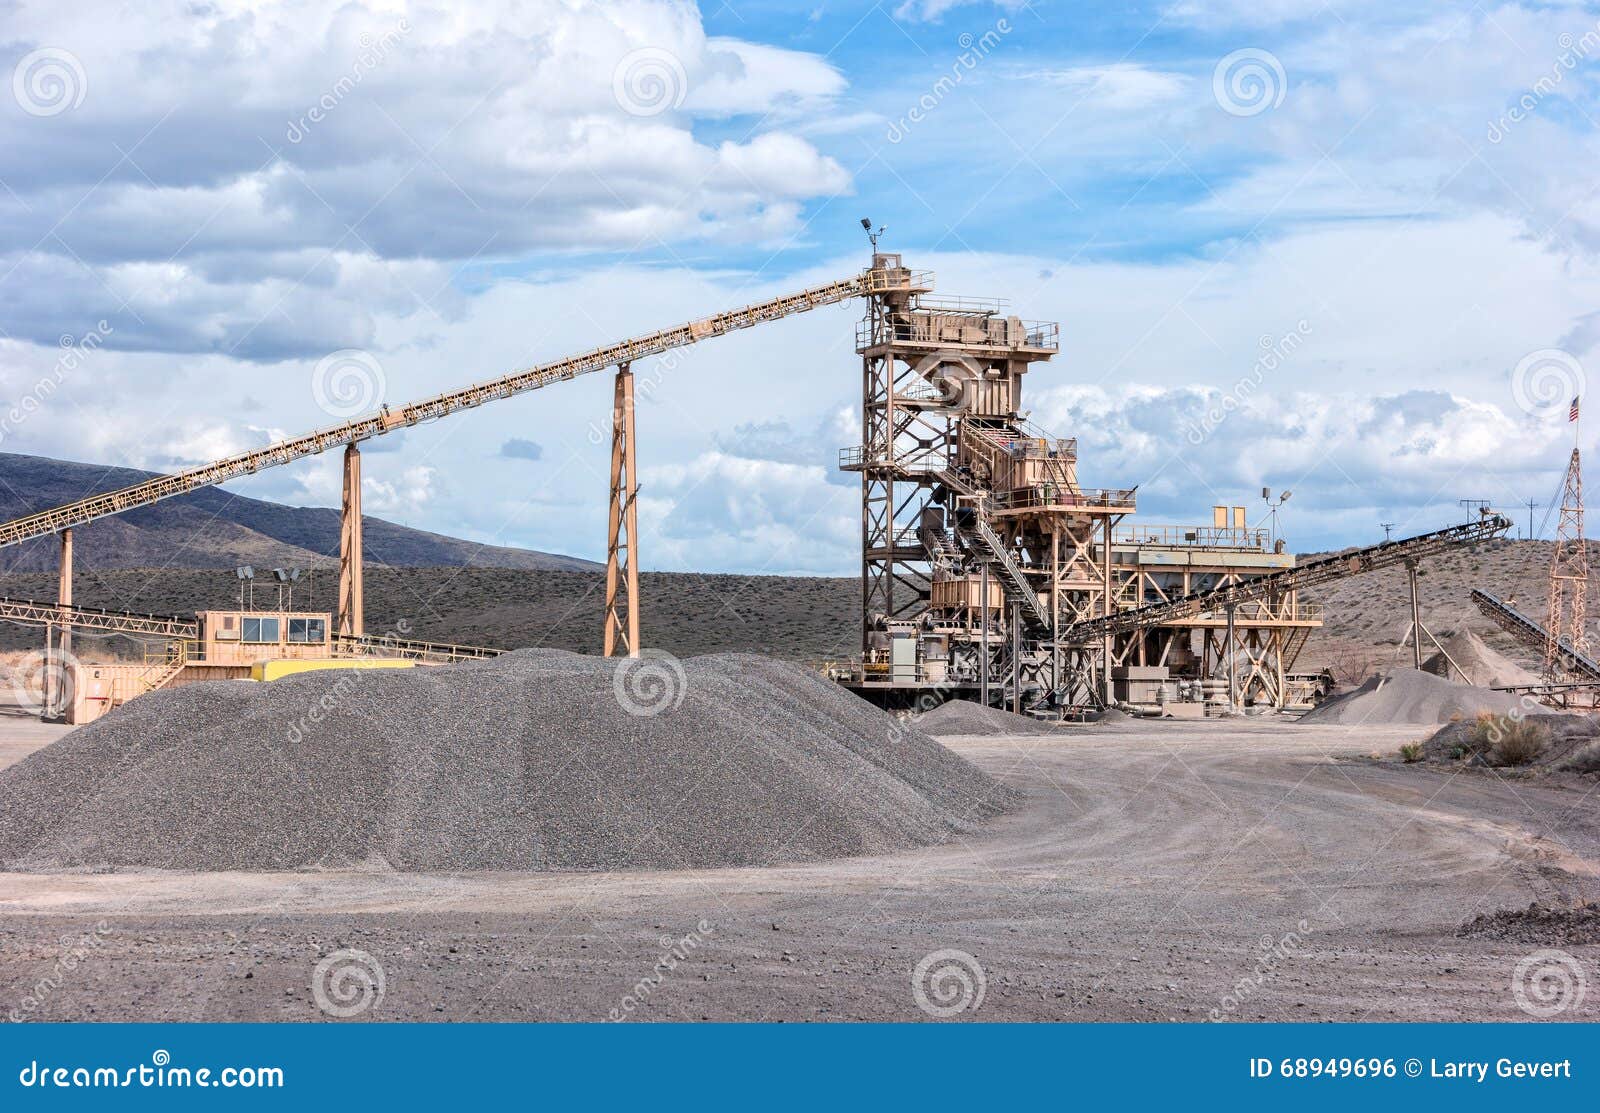 aggregate processing plant